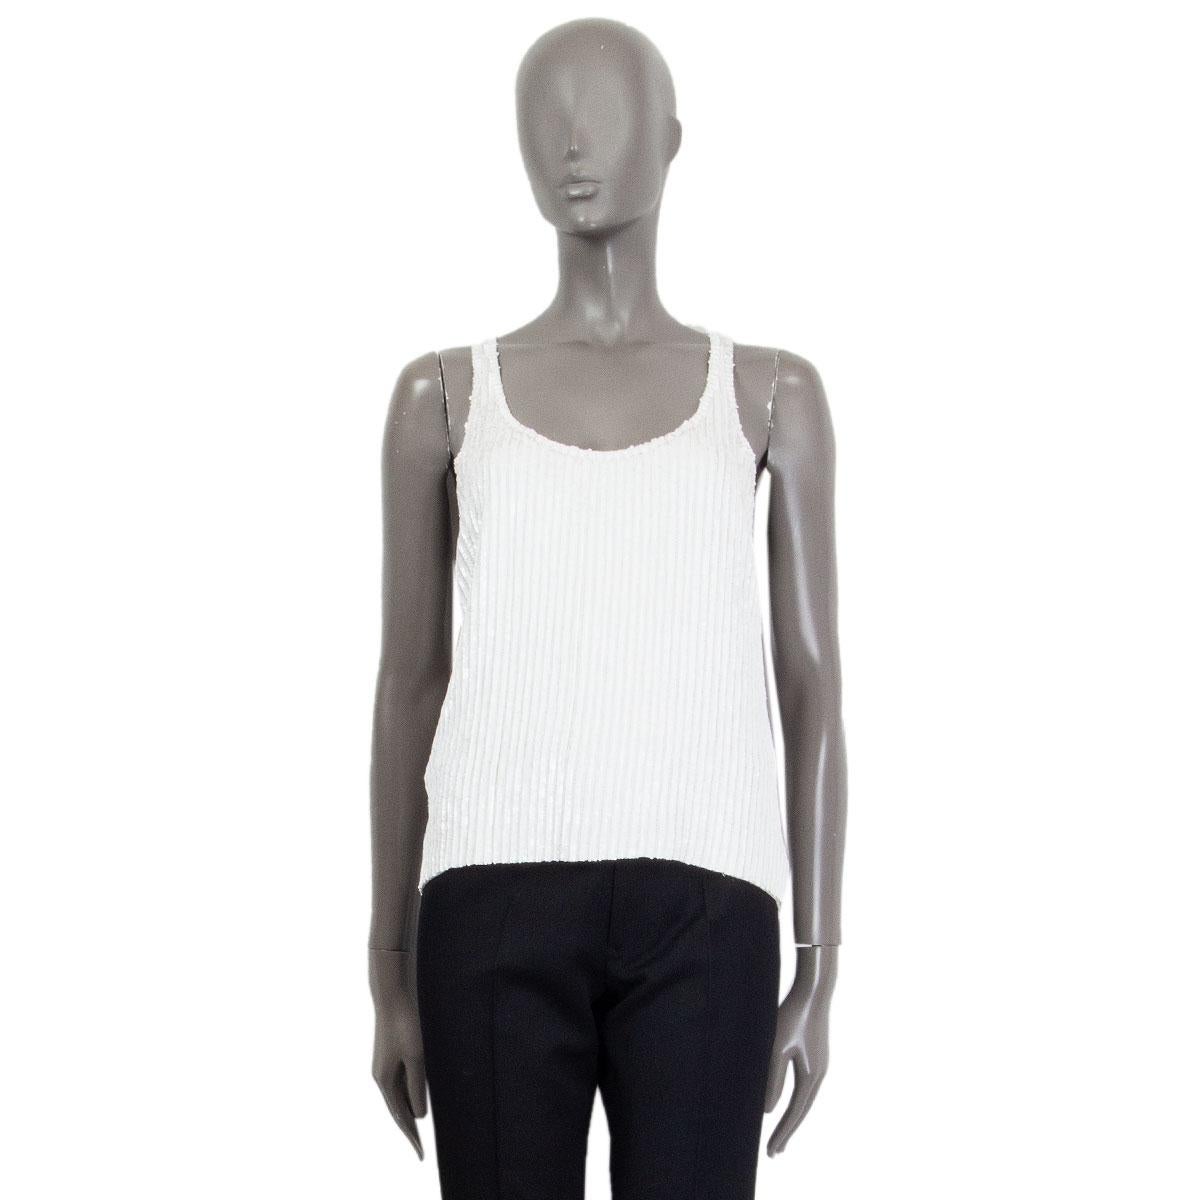 100% authentic Saint Laurent sequins sleeveless tank top in white with a scoop neck to slip on. Lined in cream silk. Has been worn and is in excellent condition.

Tag Size 40
Size M
Shoulder Width 32cm (12.5in)
Bust 90cm (35.1in)
Waist 90cm